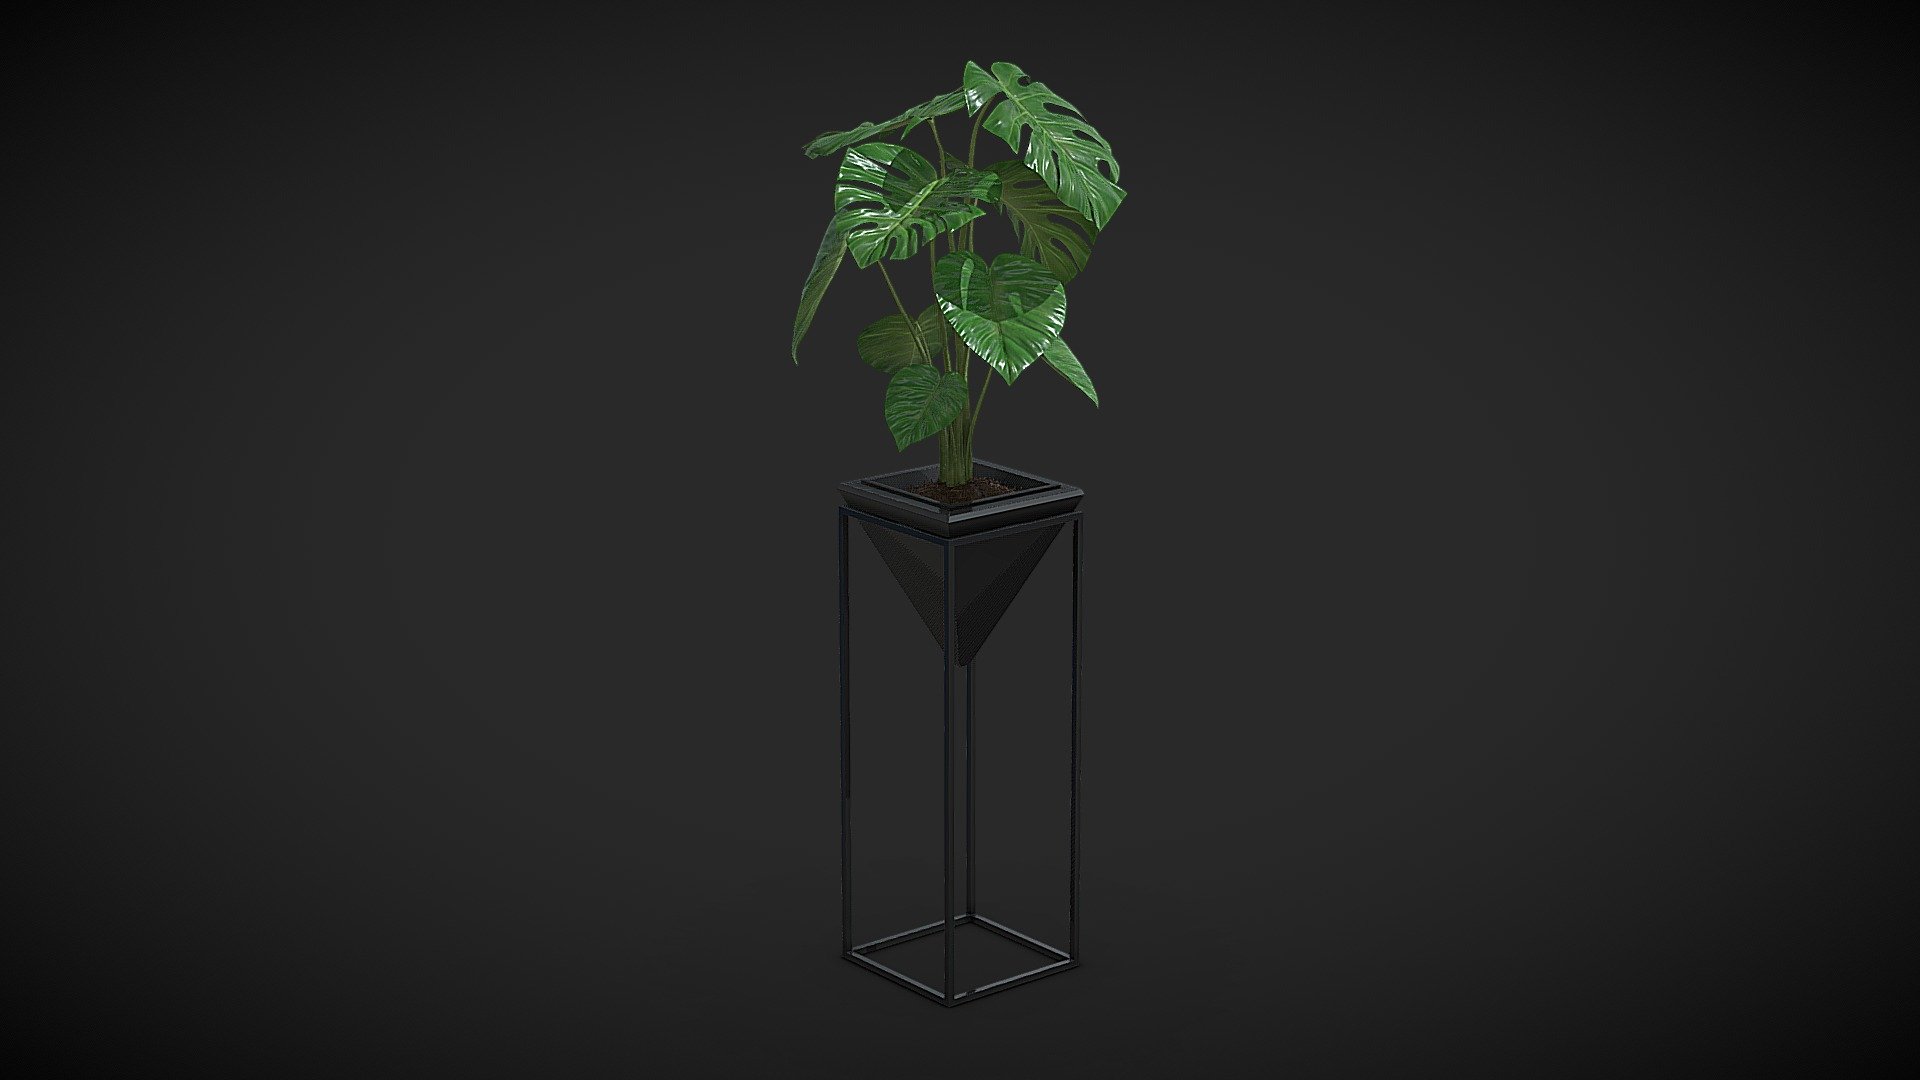 Cheese Plant - Monstera Deliciosa in a tall black pot.

Specification:




Model is in a real scale

Polygons: 60353

Verticles: 70875

Only Quads and Triangles used

Formats:




3ds max 2017 V-Ray (native)

3ds max 2017 Corona

3ds max 2017 Arnold

Cinema 4D R20 Standard

Cinema 4D R20 V-Ray

Blender Cycles

Unreal Engine 5.1

Unity 2020

FBX

OBJ

DWG
 - Cheese Plant III - Buy Royalty Free 3D model by Fusemesh 3d model